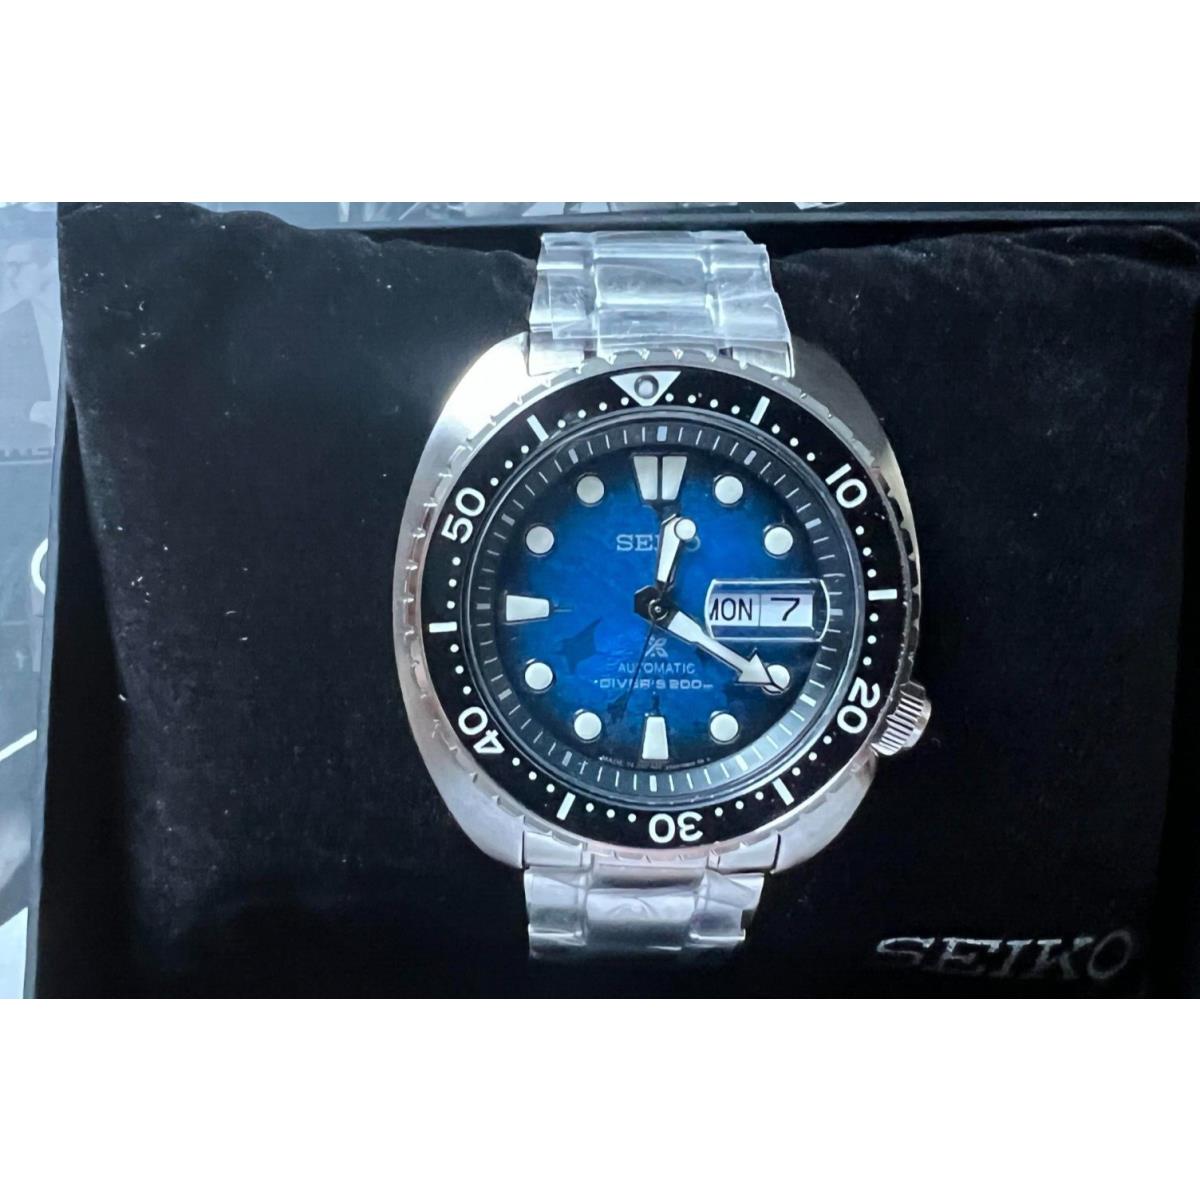 Seiko Manta Ray Themed Gradient Blue Dial with Stamped Wave Pattern SRPE39